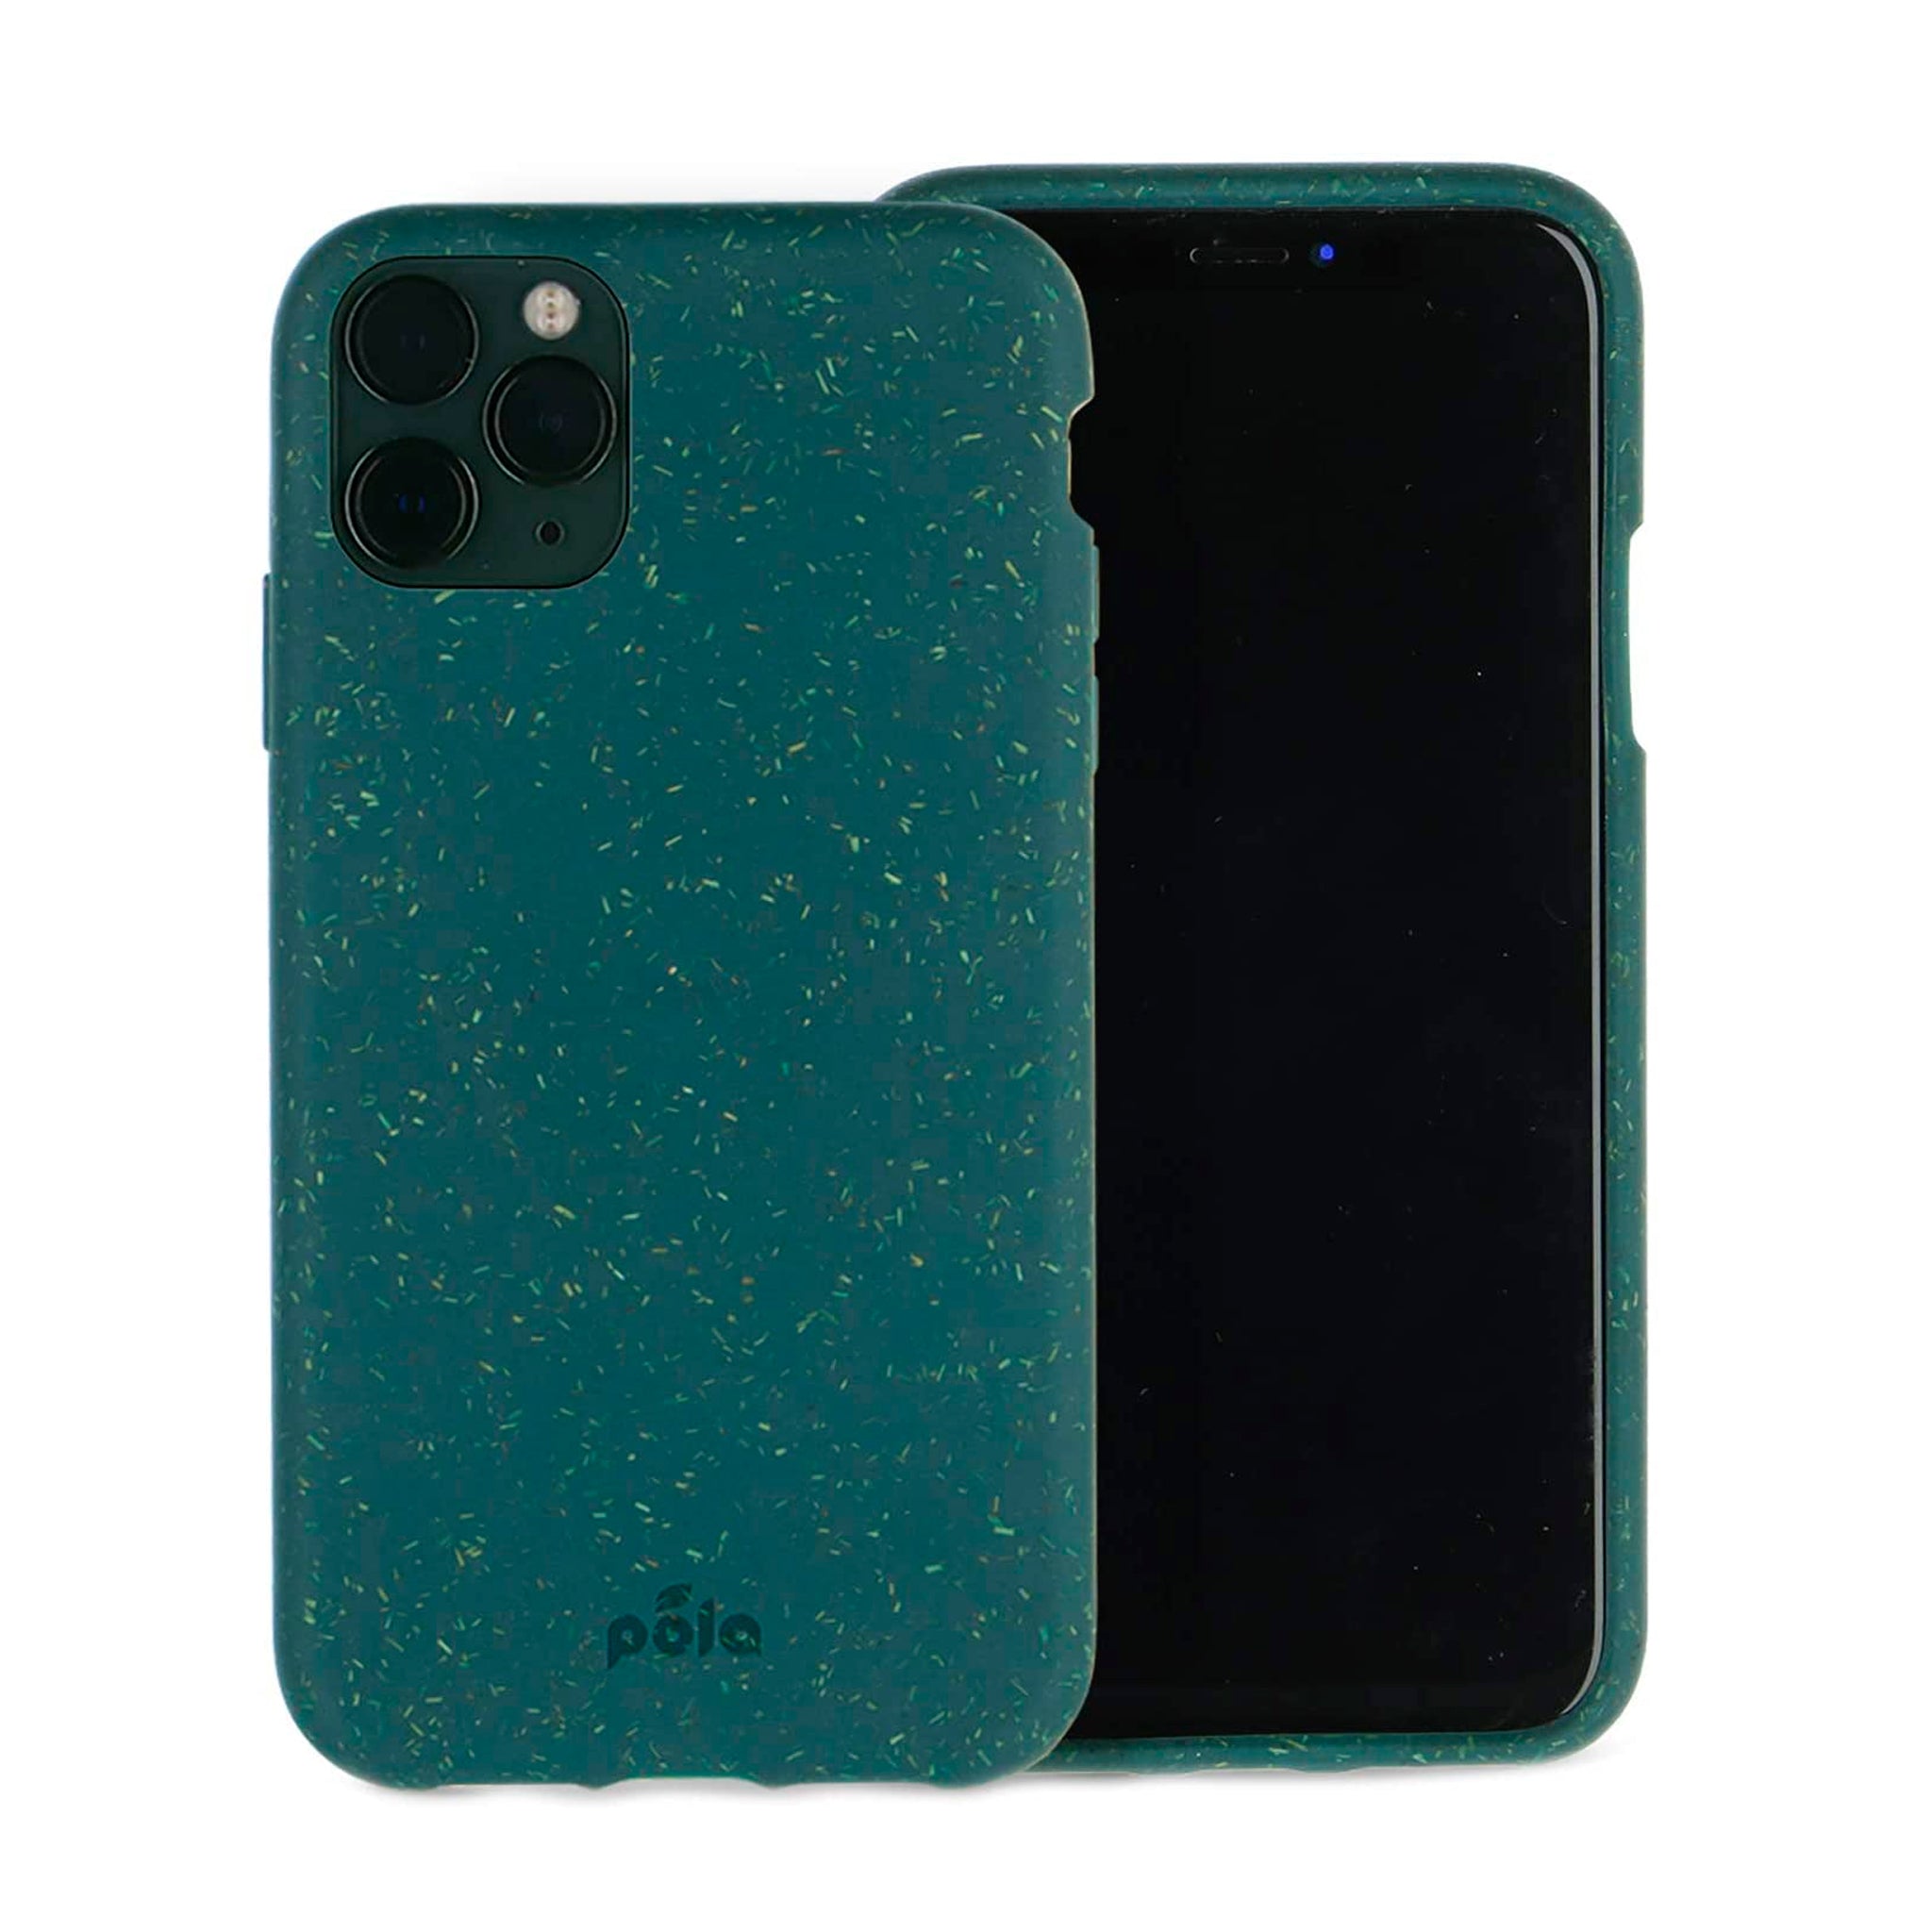 Pela - Eco Friendly Case For Apple Iphone 11 Pro - Green